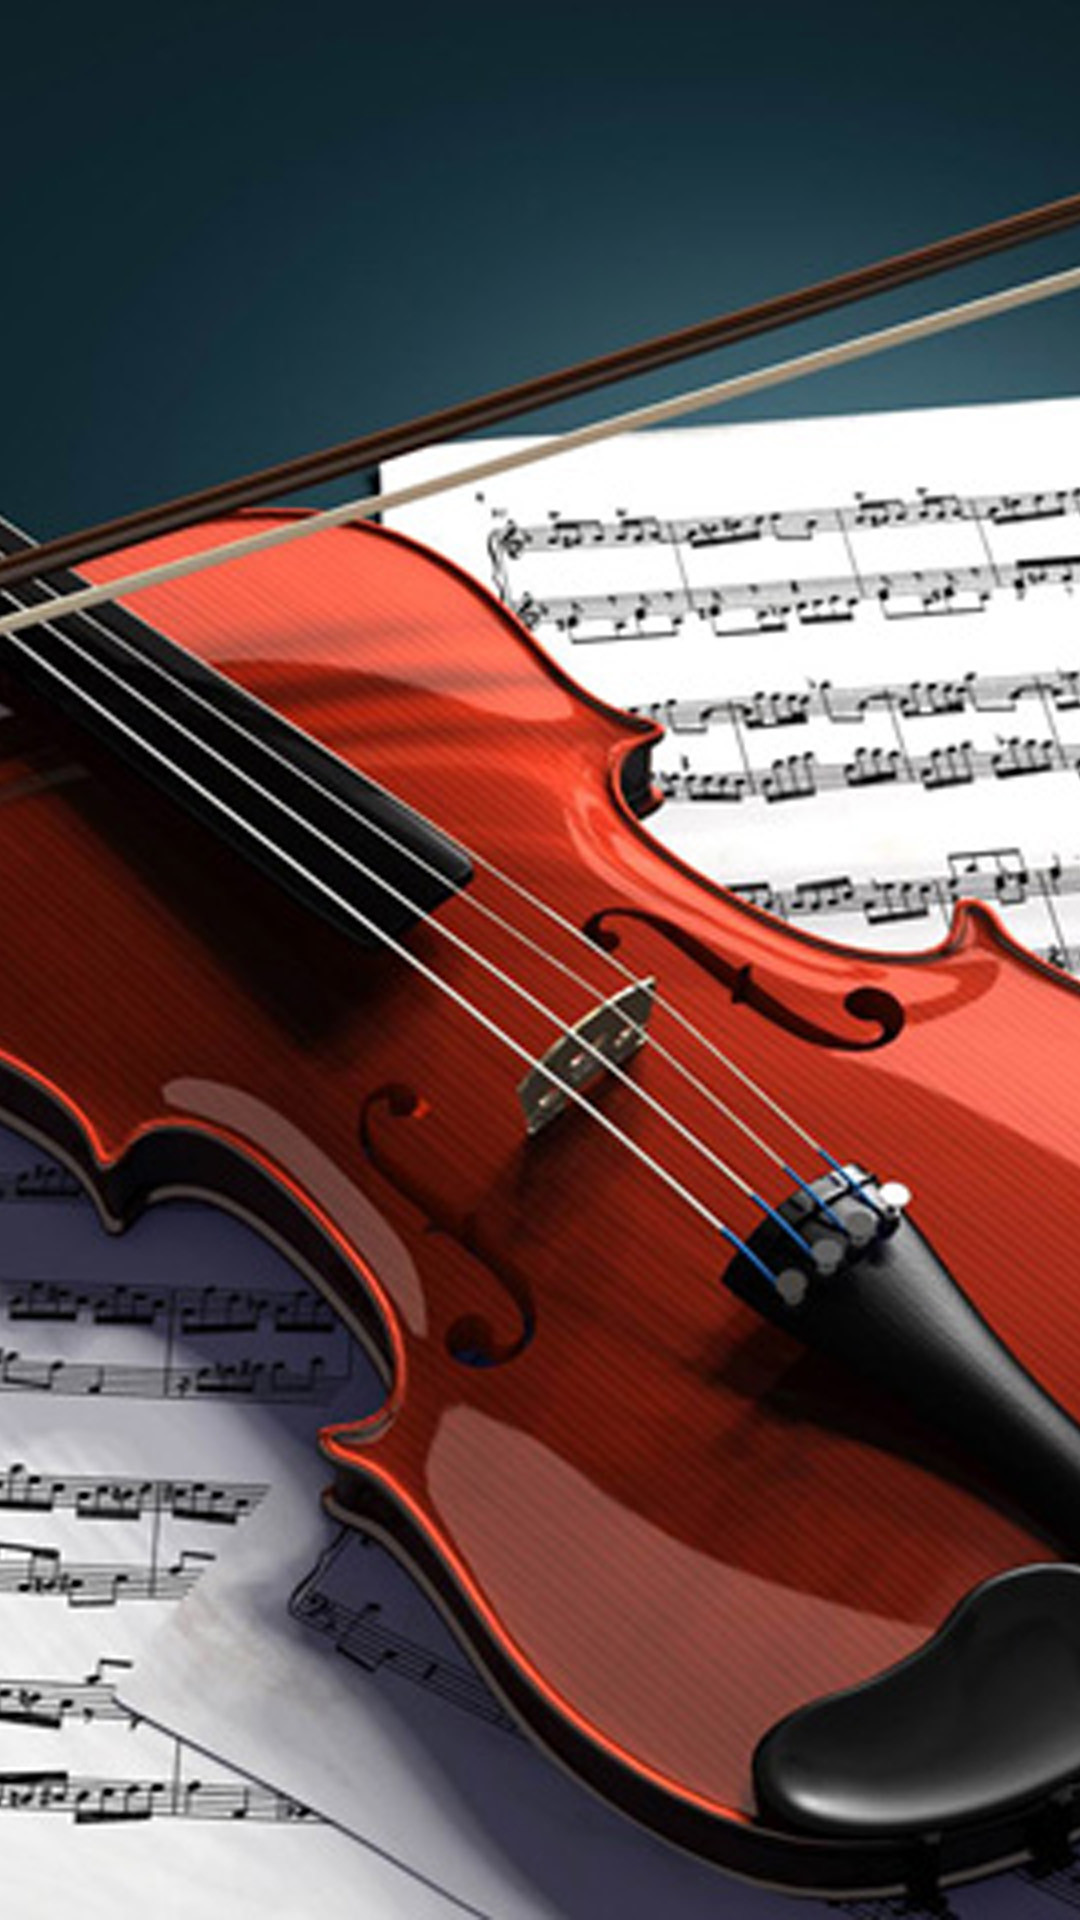 Beautiful Violin Wallpapers for Galaxy S5